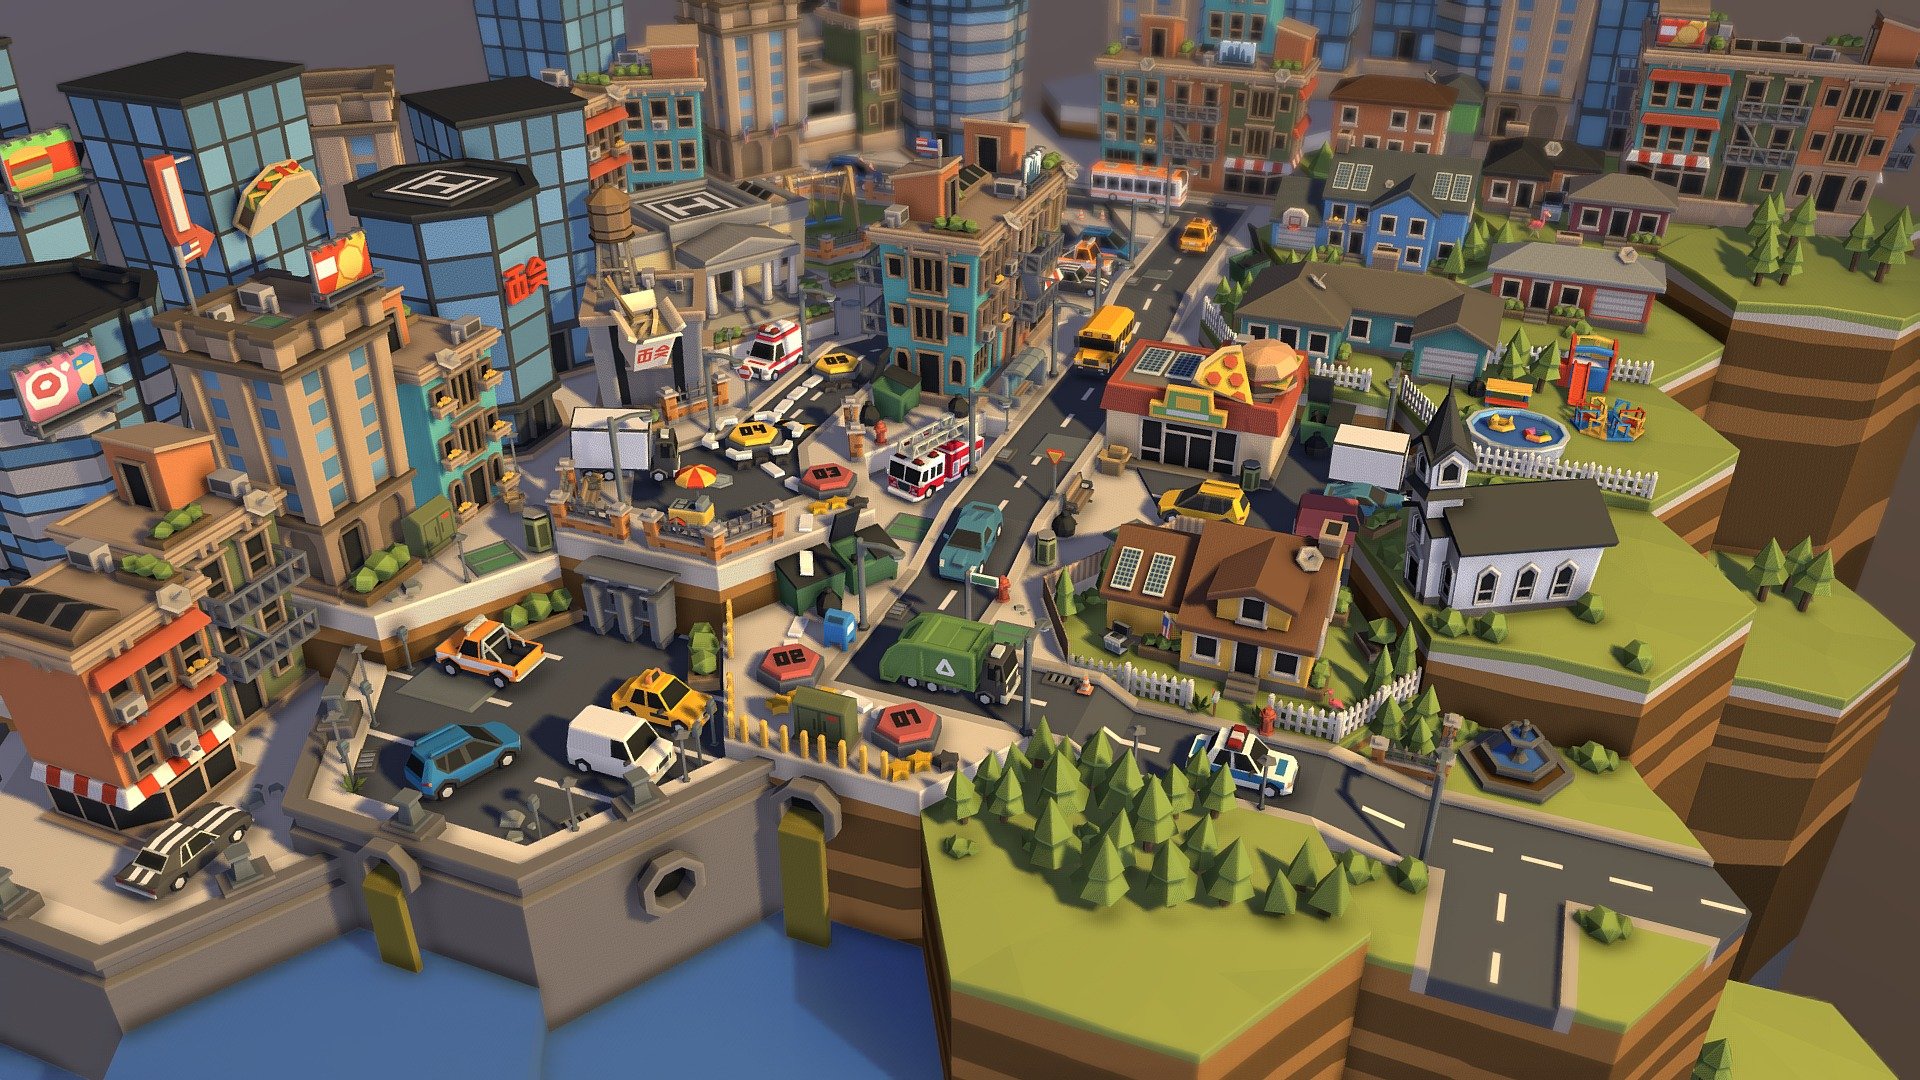 One of the demo scenes from POLYGON Mini - City Pack by Synty Studios

A low poly asset pack of hexagonal tiles, cube tiles, buildings, props, and environment assets to create a hex or cube game in a City/ Town theme 3d model